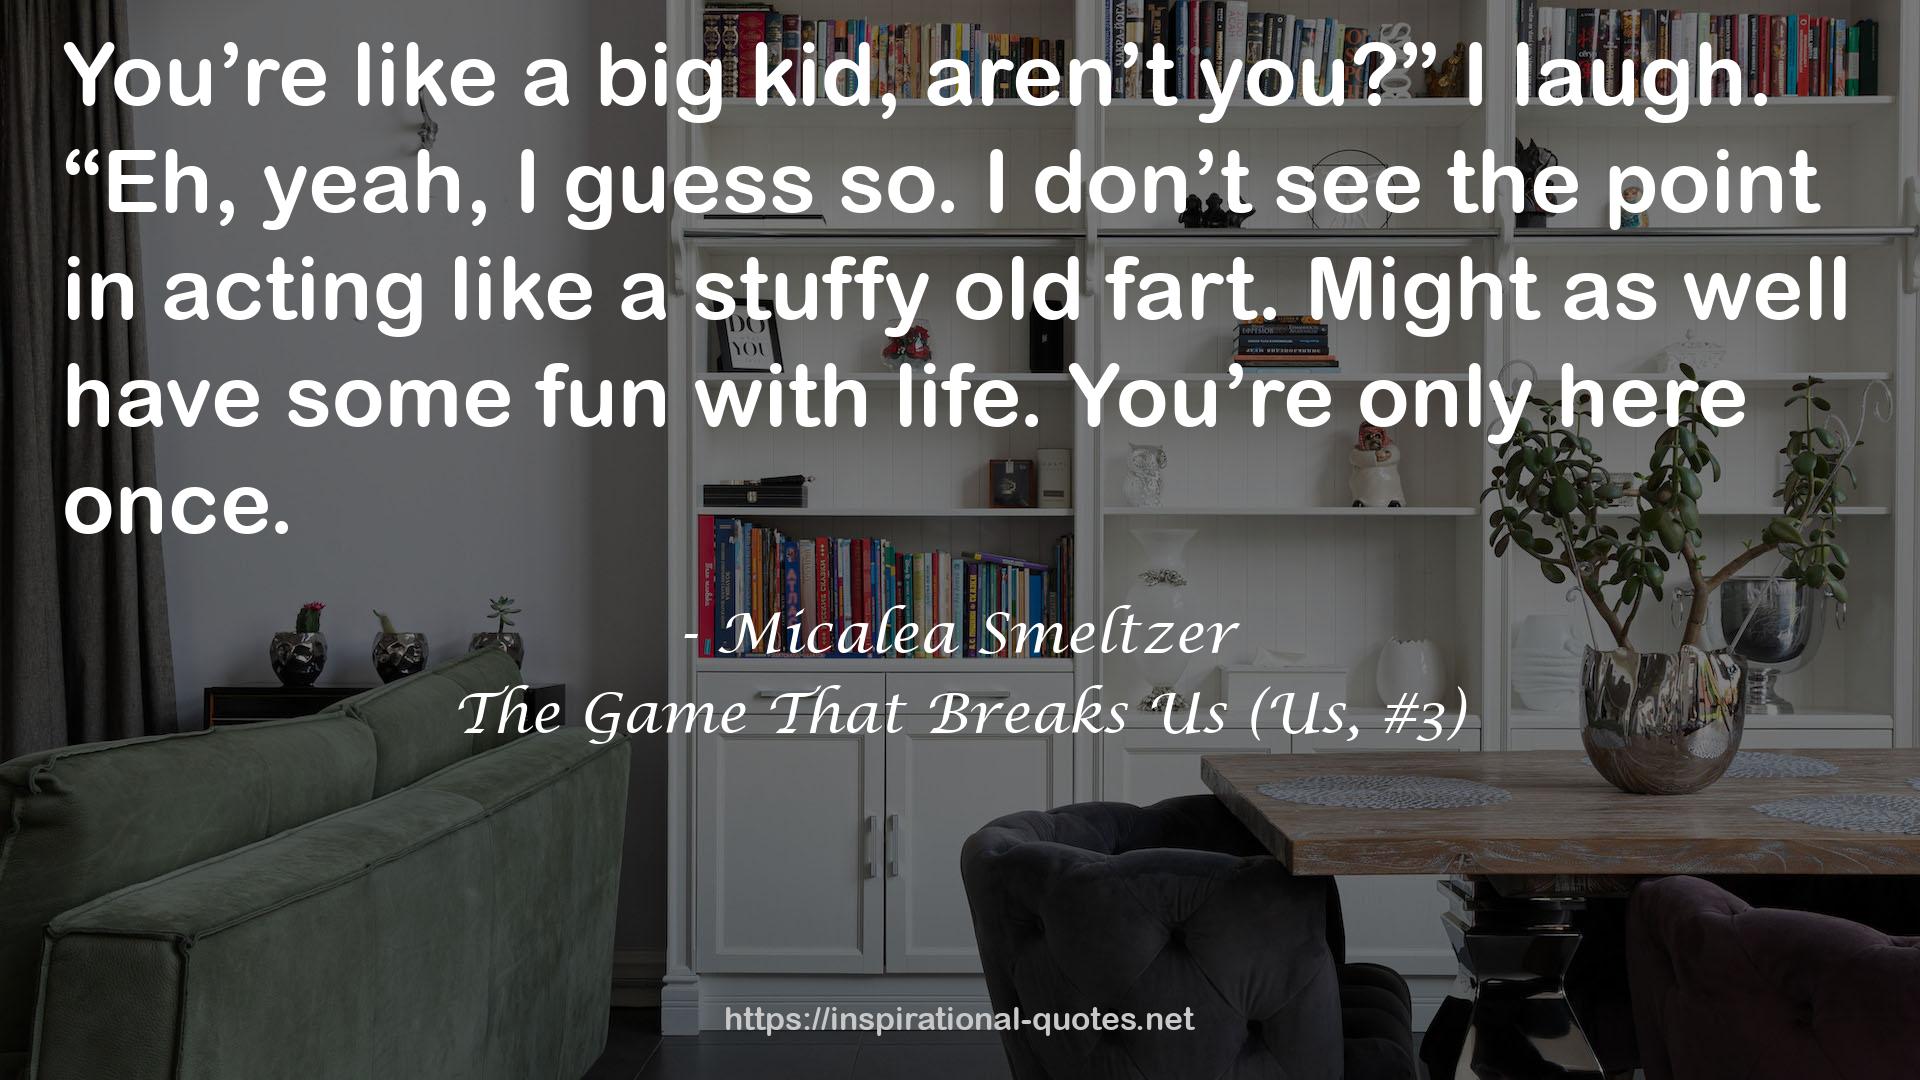 The Game That Breaks Us (Us, #3) QUOTES